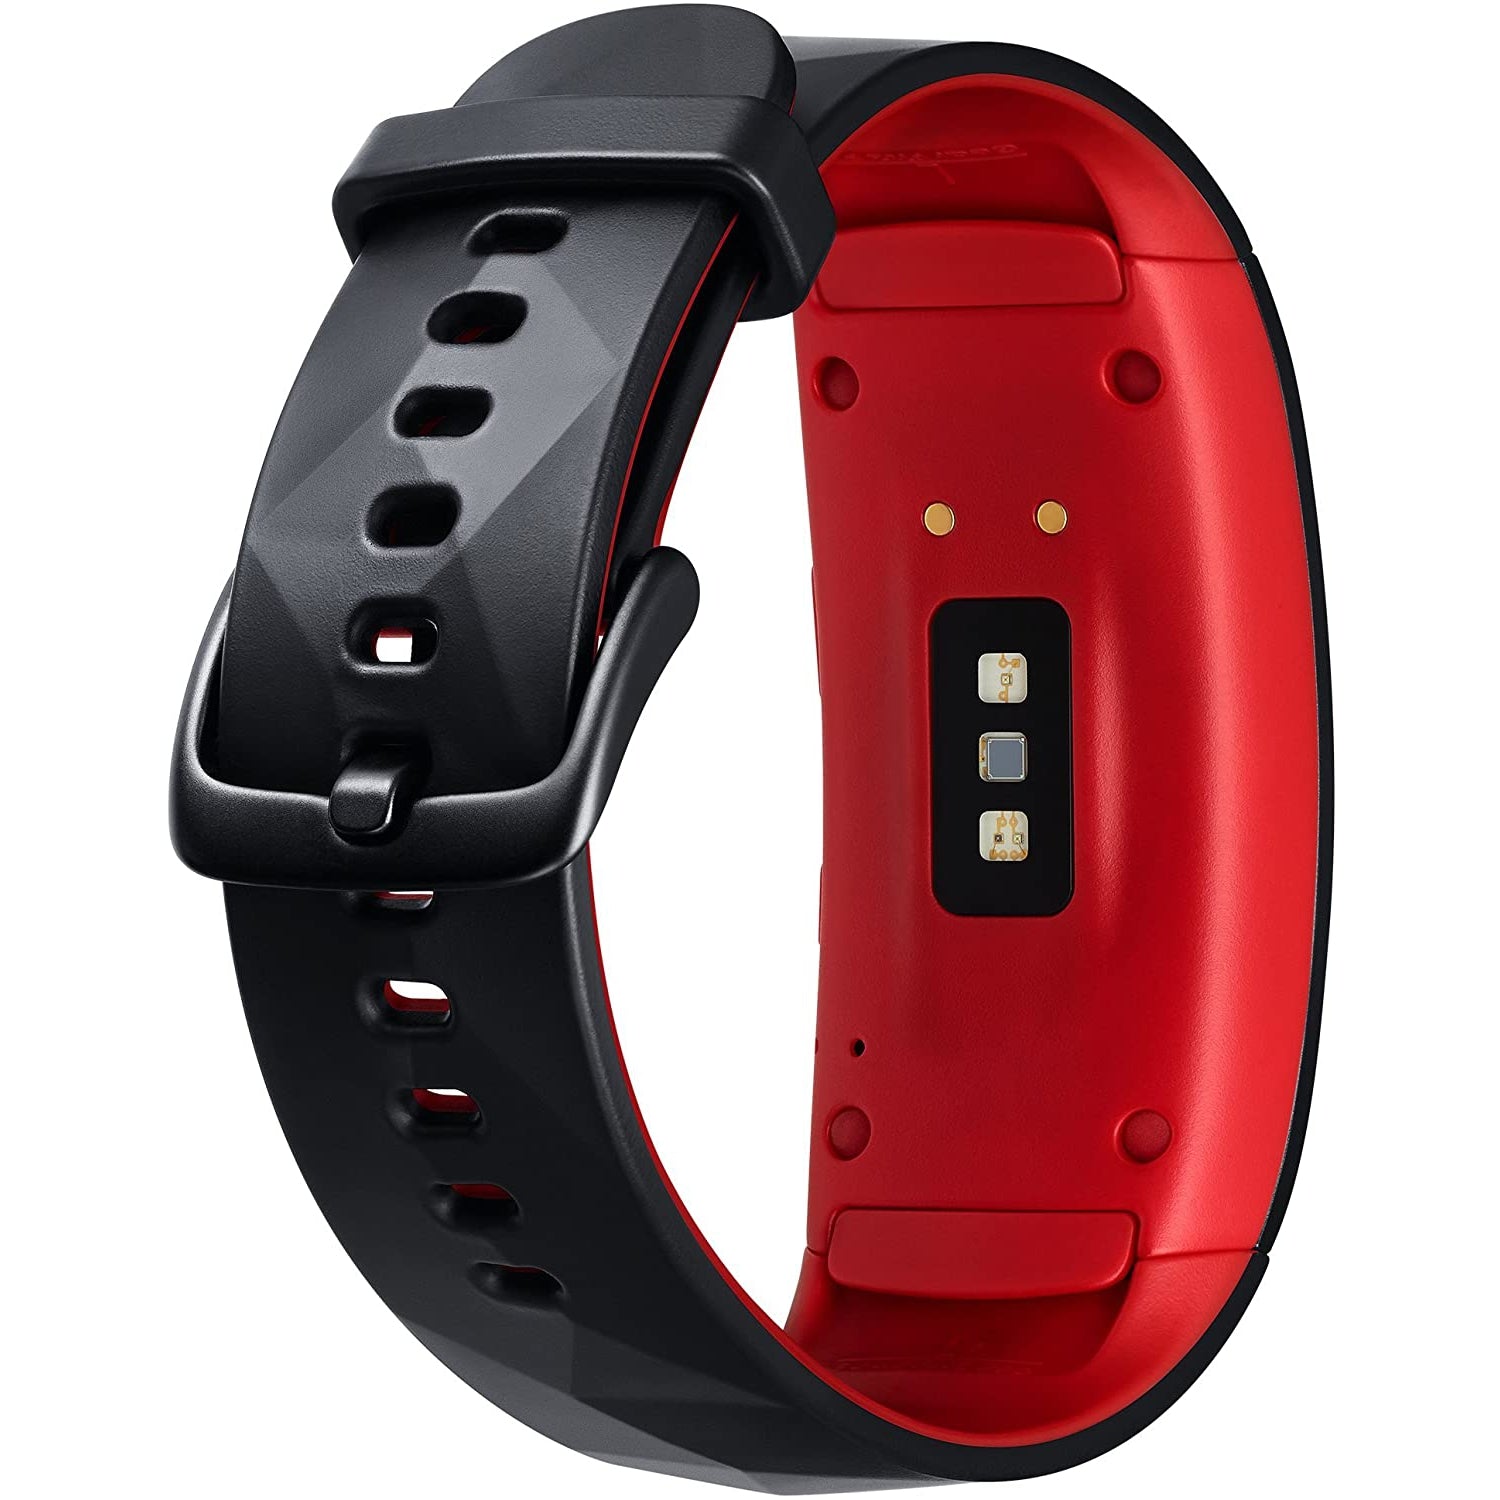 Samsung Gear Fit 2 Pro Fitness Tracker - Red